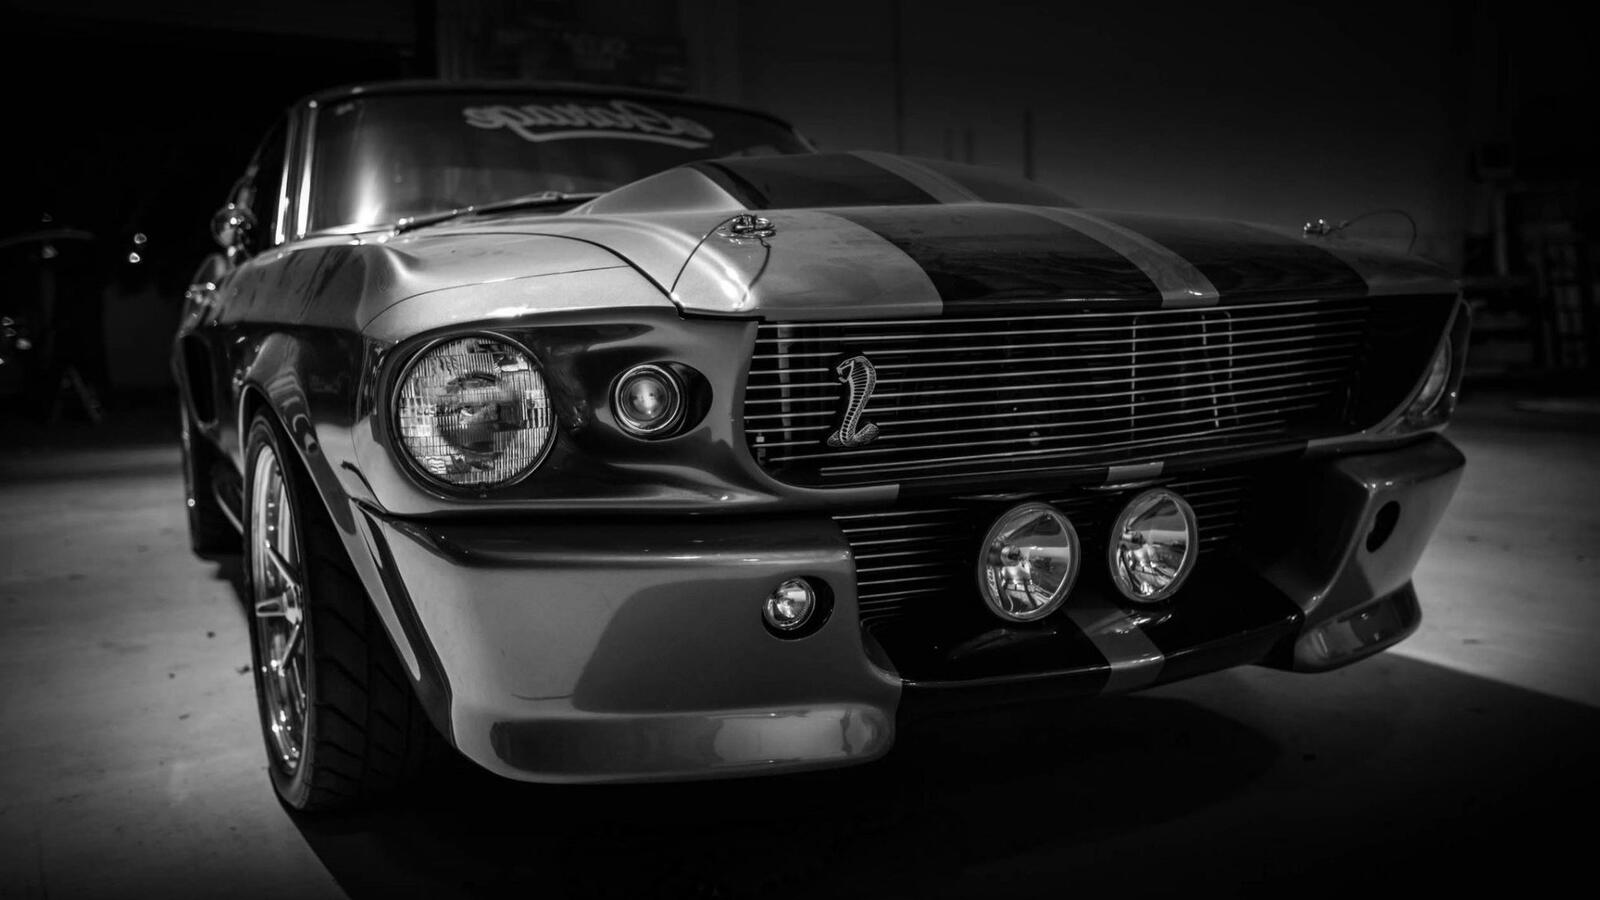 Wallpapers monochrome Ford Mustang cars on the desktop